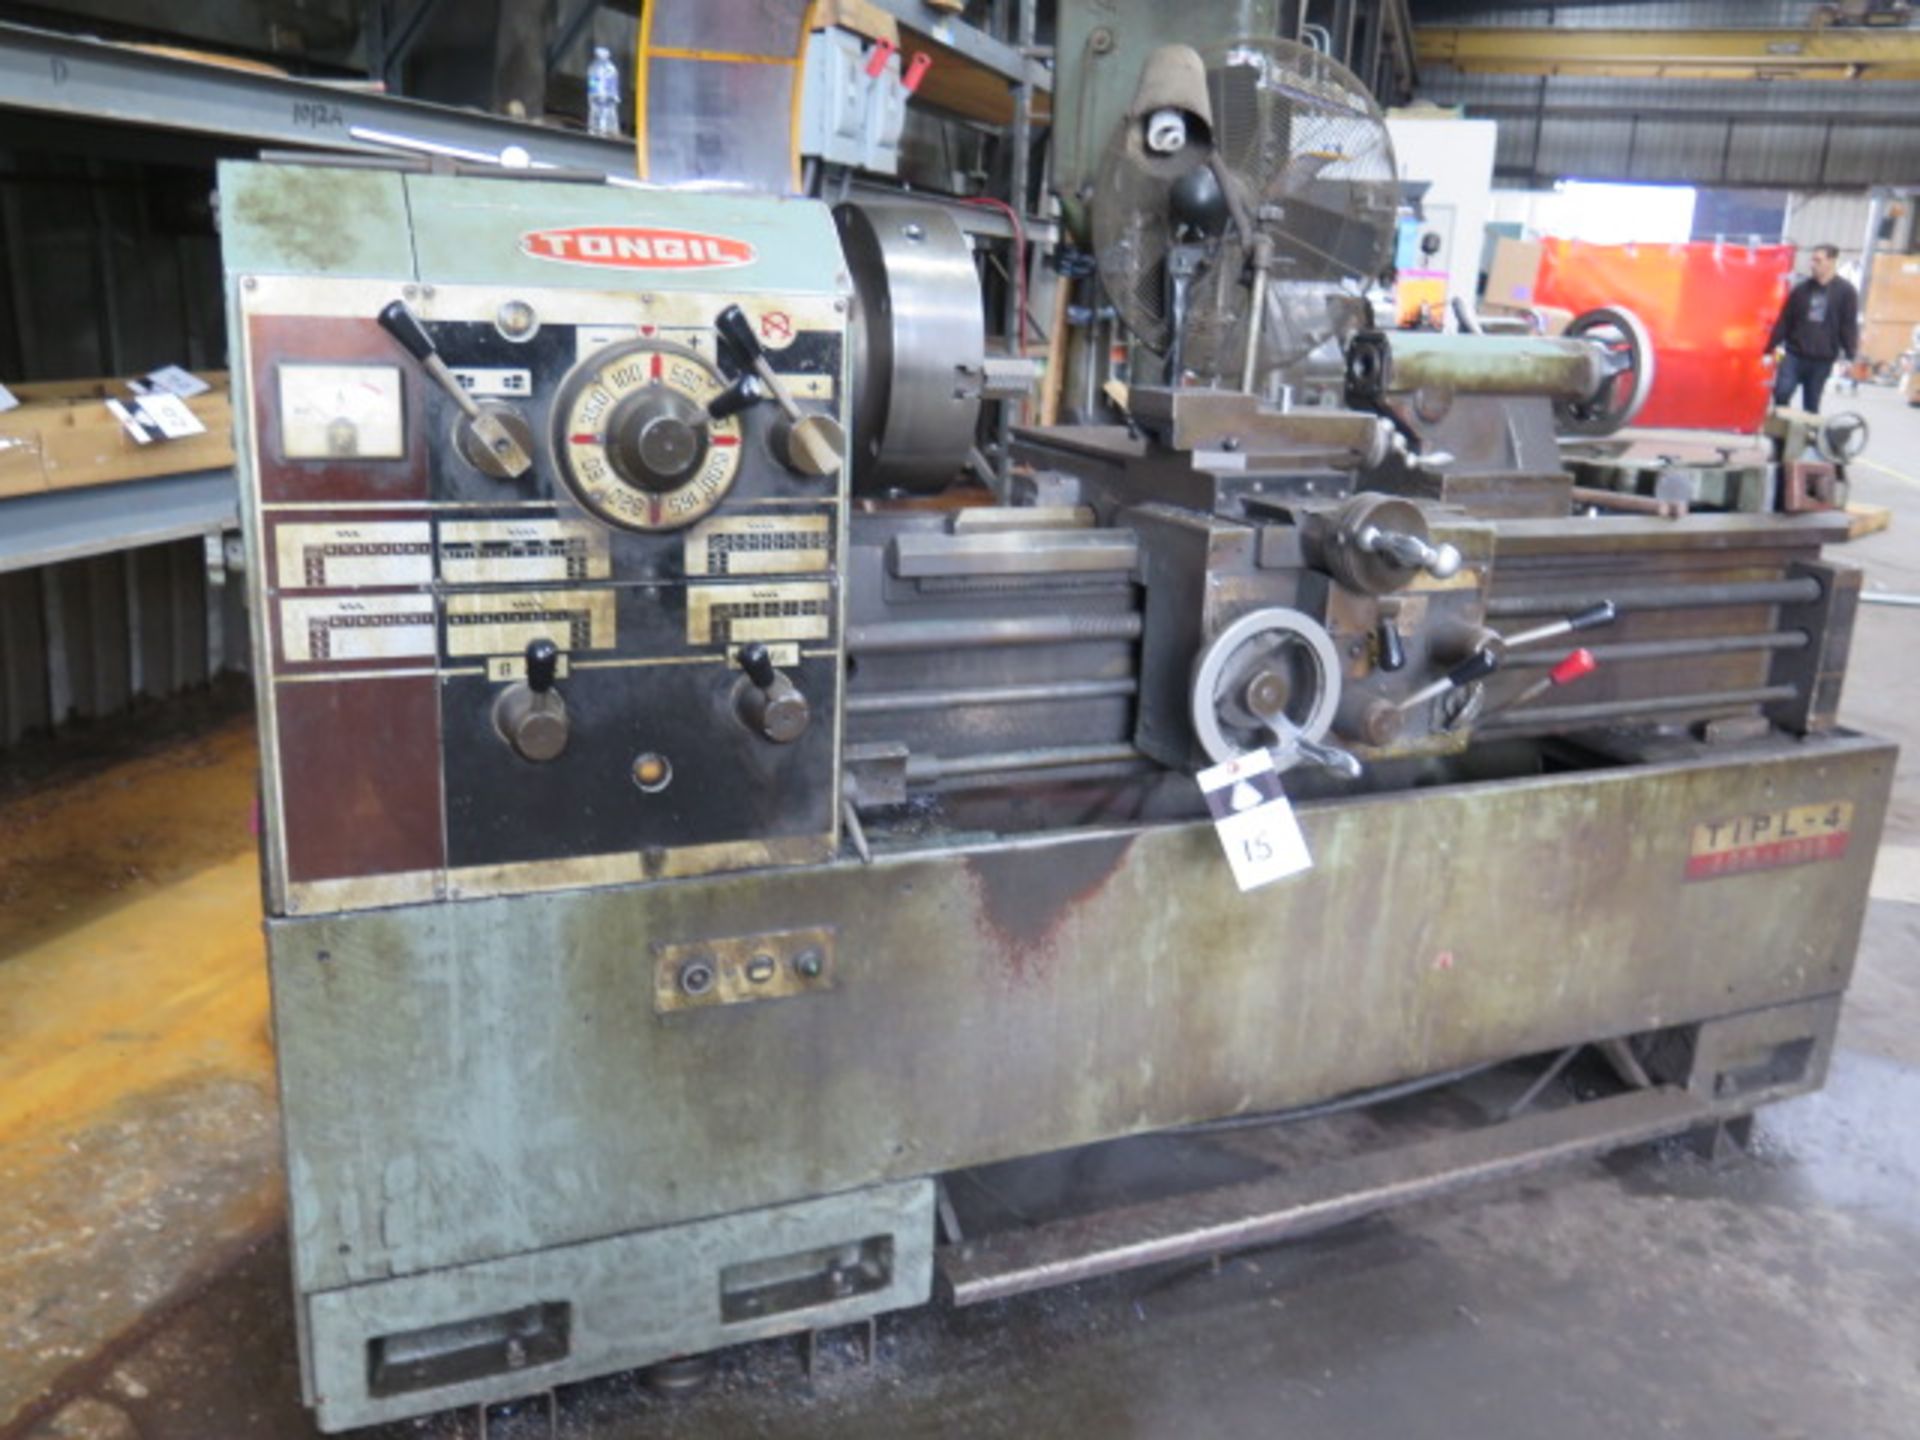 Tongil TIPL-4 15” x 42” Geared Head Gap Bed Lathe w/ 60-1500 RPM, Inch/mm Threading, SOLD AS IS - Image 2 of 12